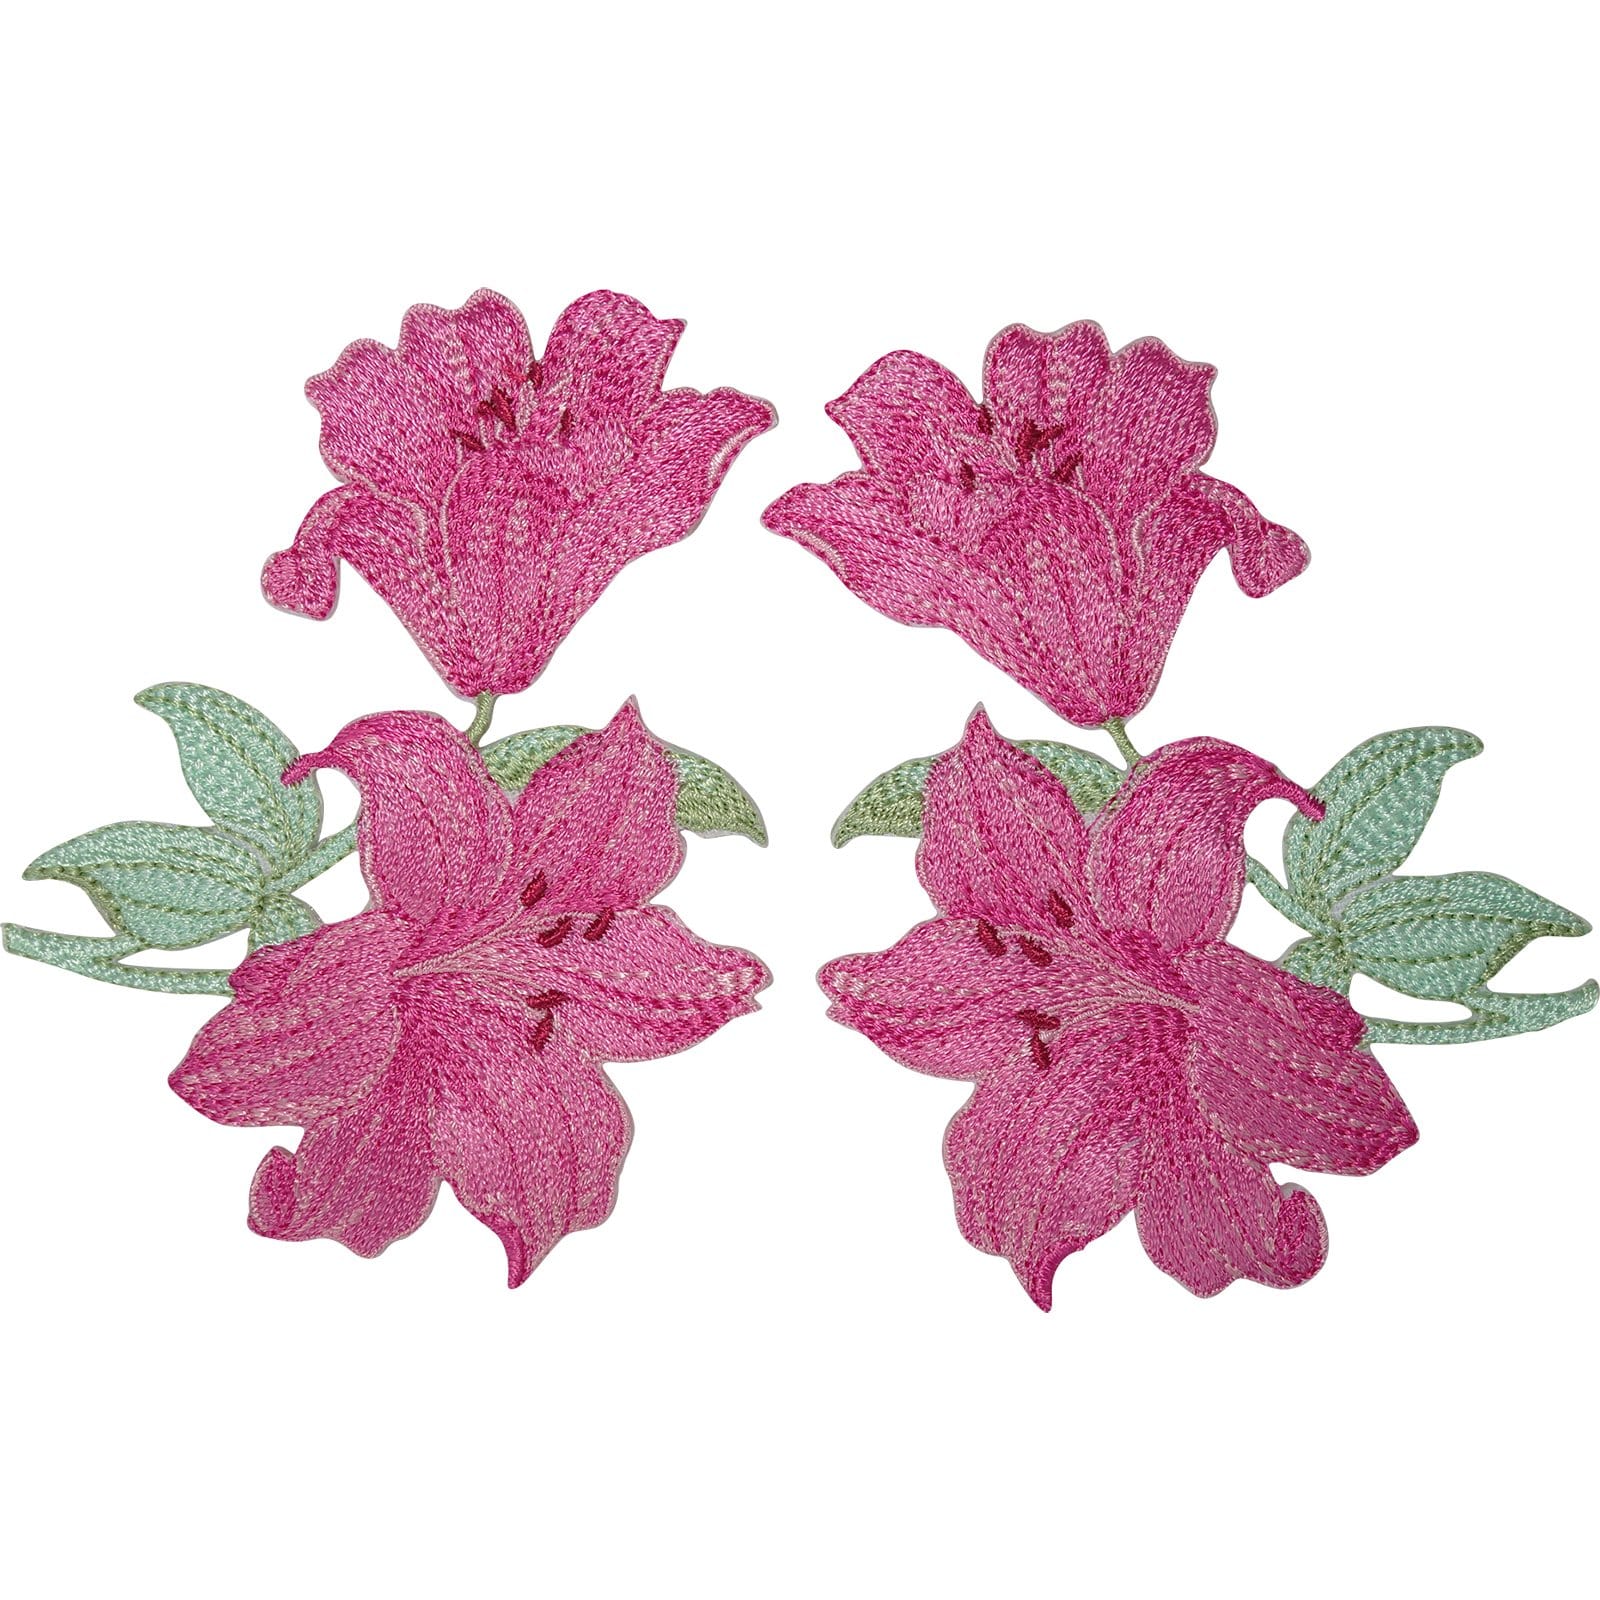 Pair of Iron On Flower Patches Sew On Patch Badge Clothing Jeans Dress Flowers